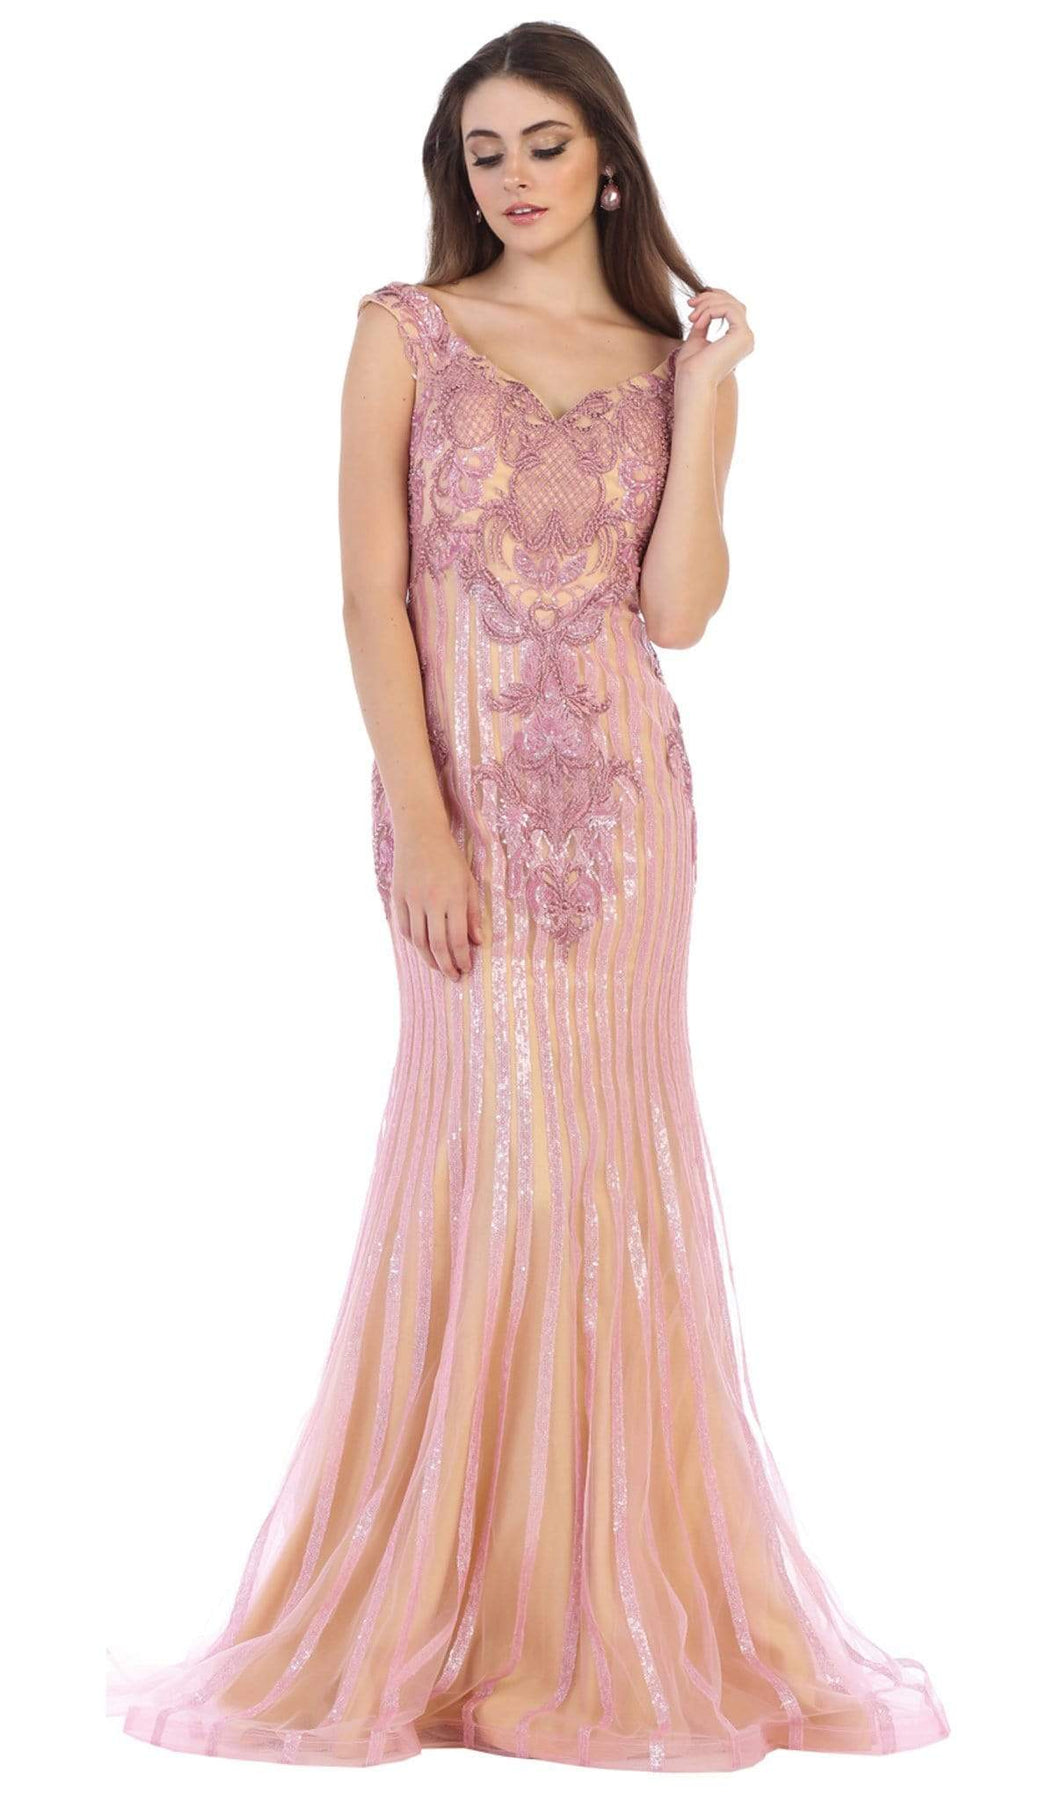 May Queen - RQ7640 Embellished Wide V-neck Trumpet Dress Special Occasion Dress 4 / Dusty-Rose